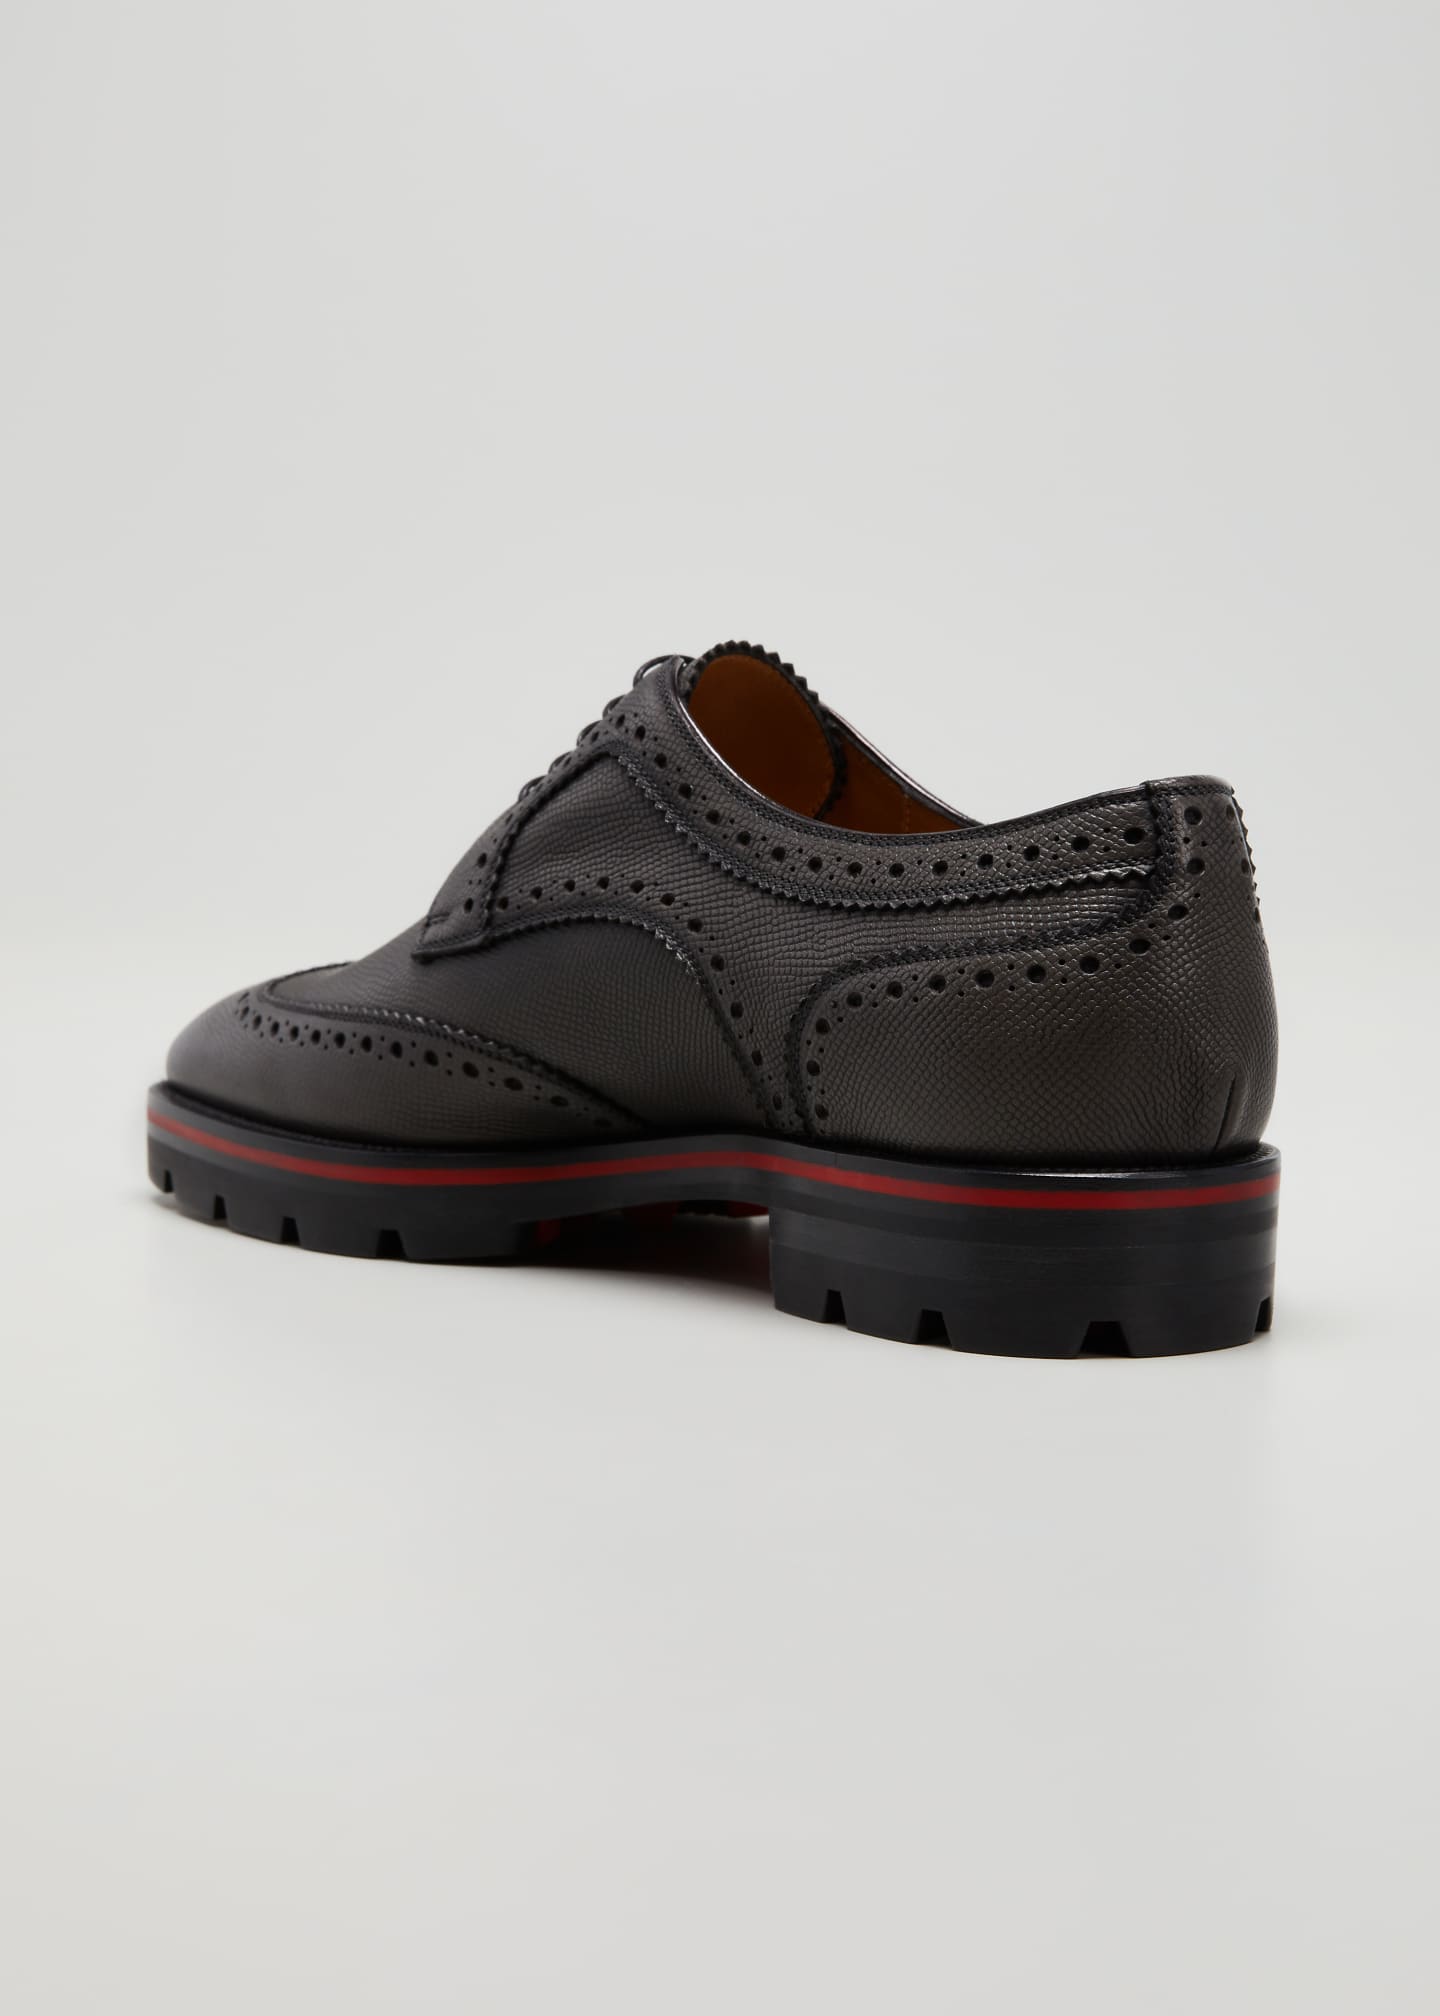 Christian Louboutin Men's Laurlaf Brogue Leather Red Sole Derby Shoes ...